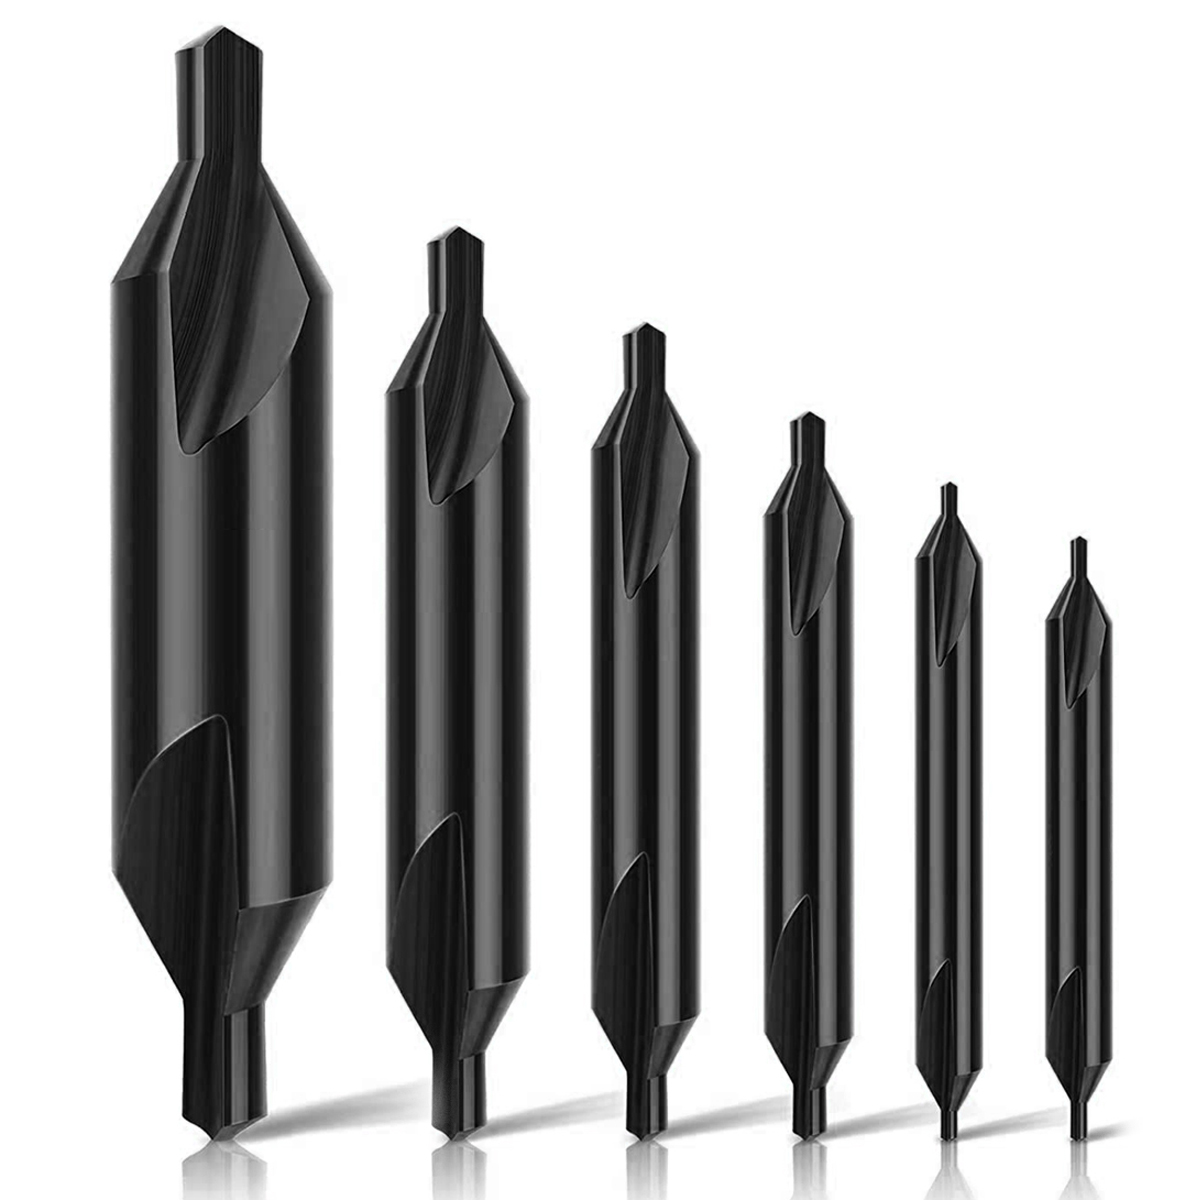 Hands DIY 6pcs Center Drill Bits Set High Speed Steel Combined Drill 60 Degree Angle Kit 1.0/1.5/2/2.5/3/5mm Countersink Lathe Bit for 170 HB - 200 HB Metal Alloy Iron - image 1 of 7